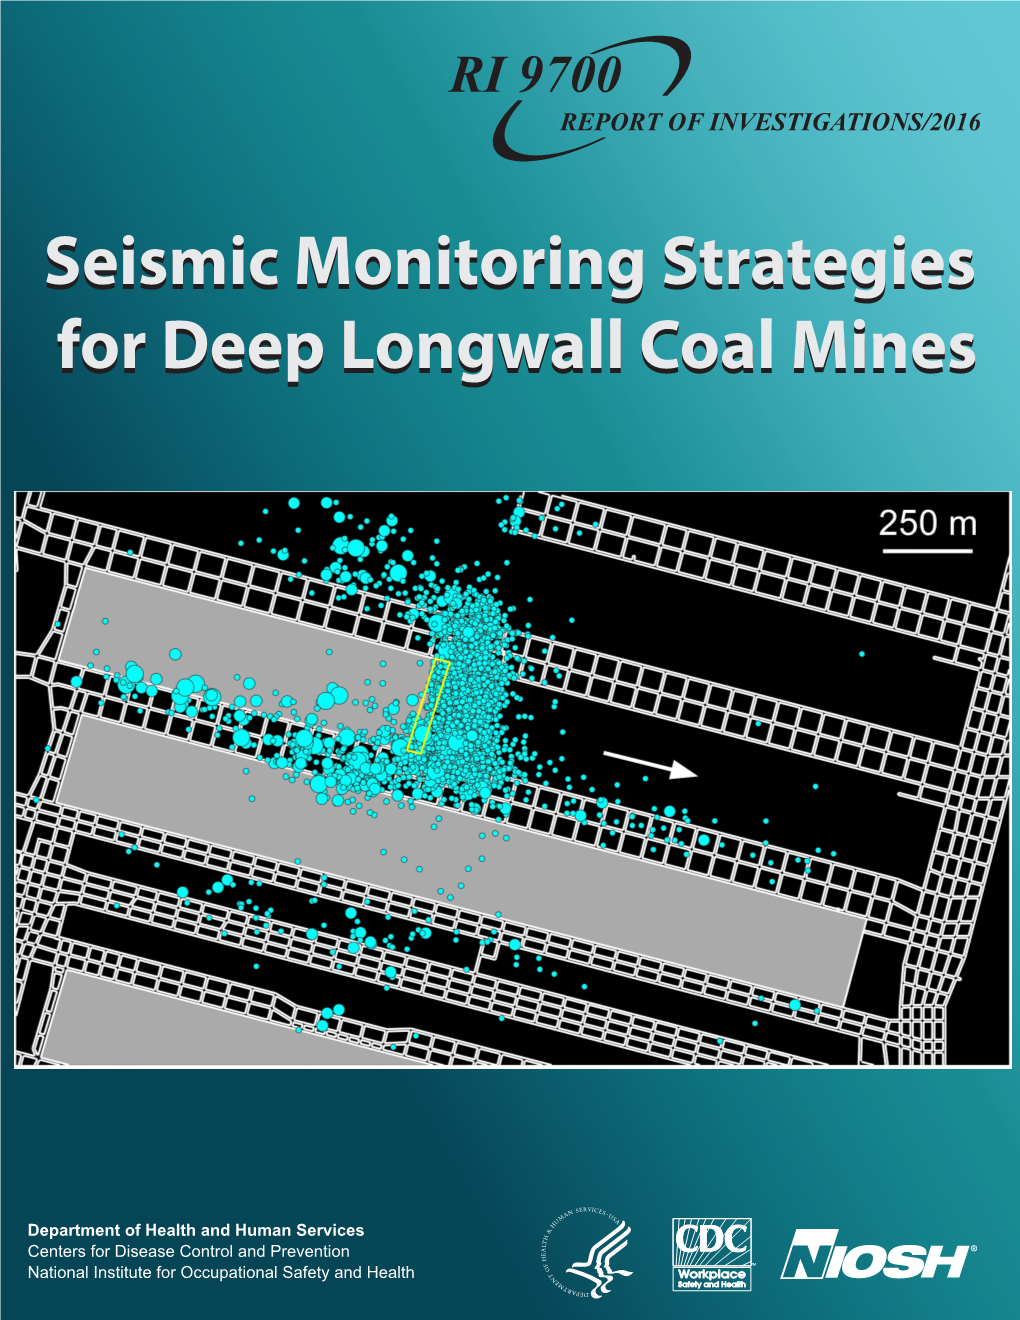 Seismic Monitoring Strategies for Deep Longwall Coal Mines Report of Investigations 9700